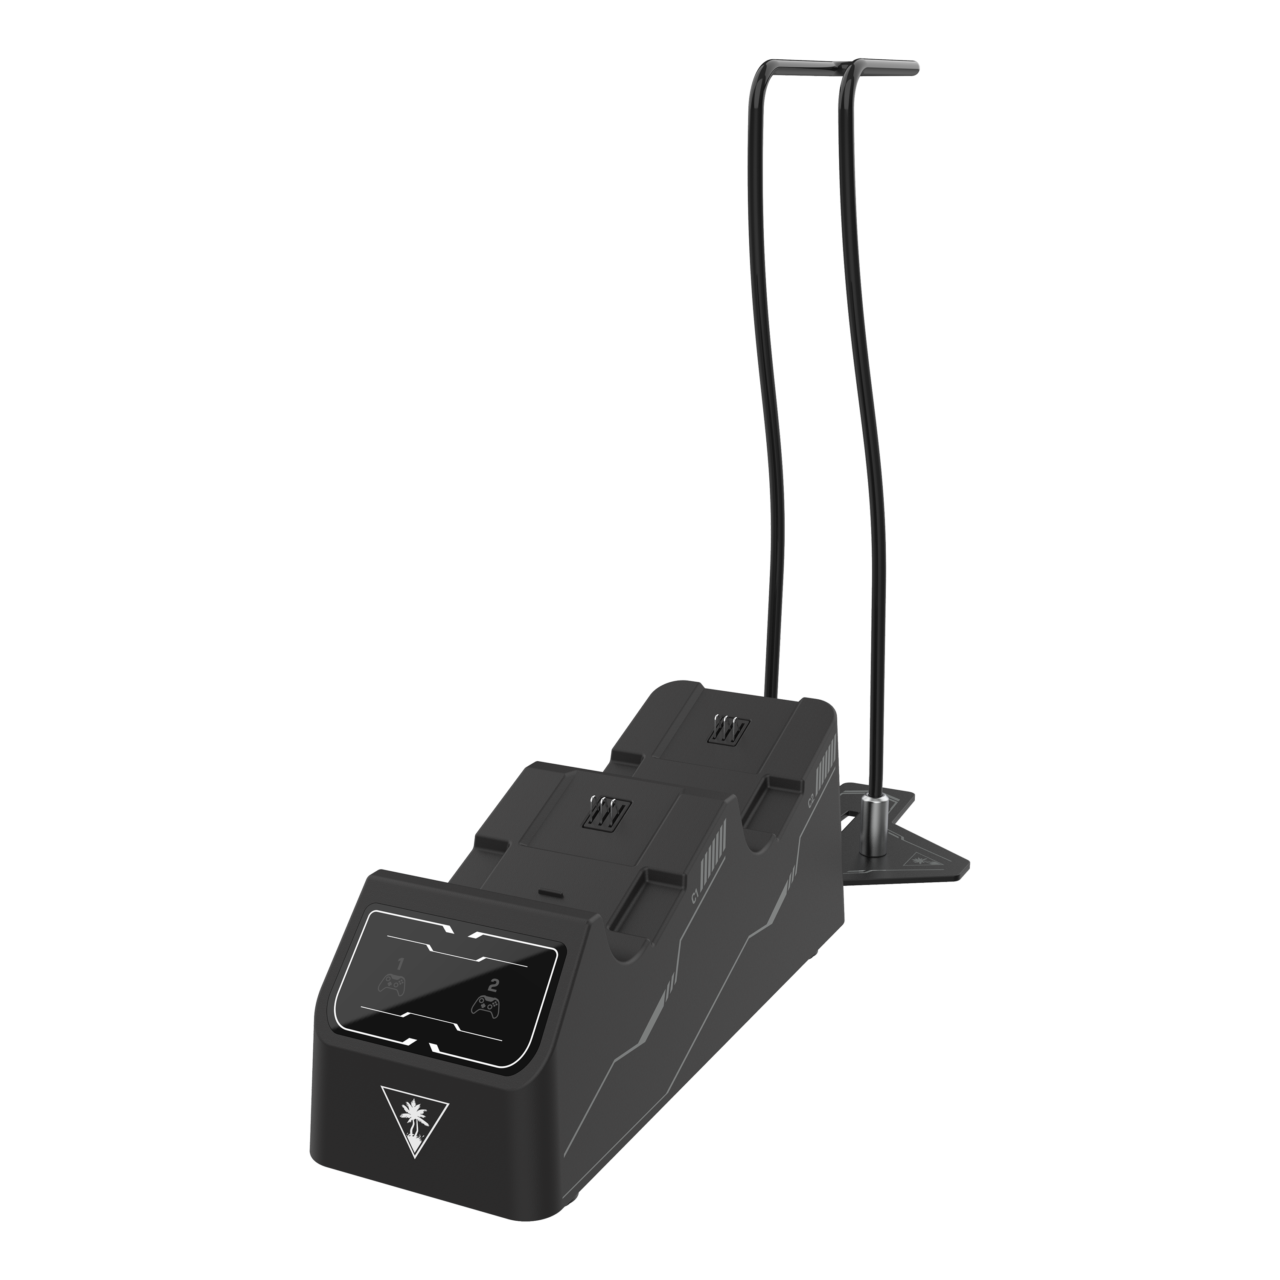 Designed For Xbox Fuel Dual Controller Charging Station & Headset Stand product images (Turtle Beach)